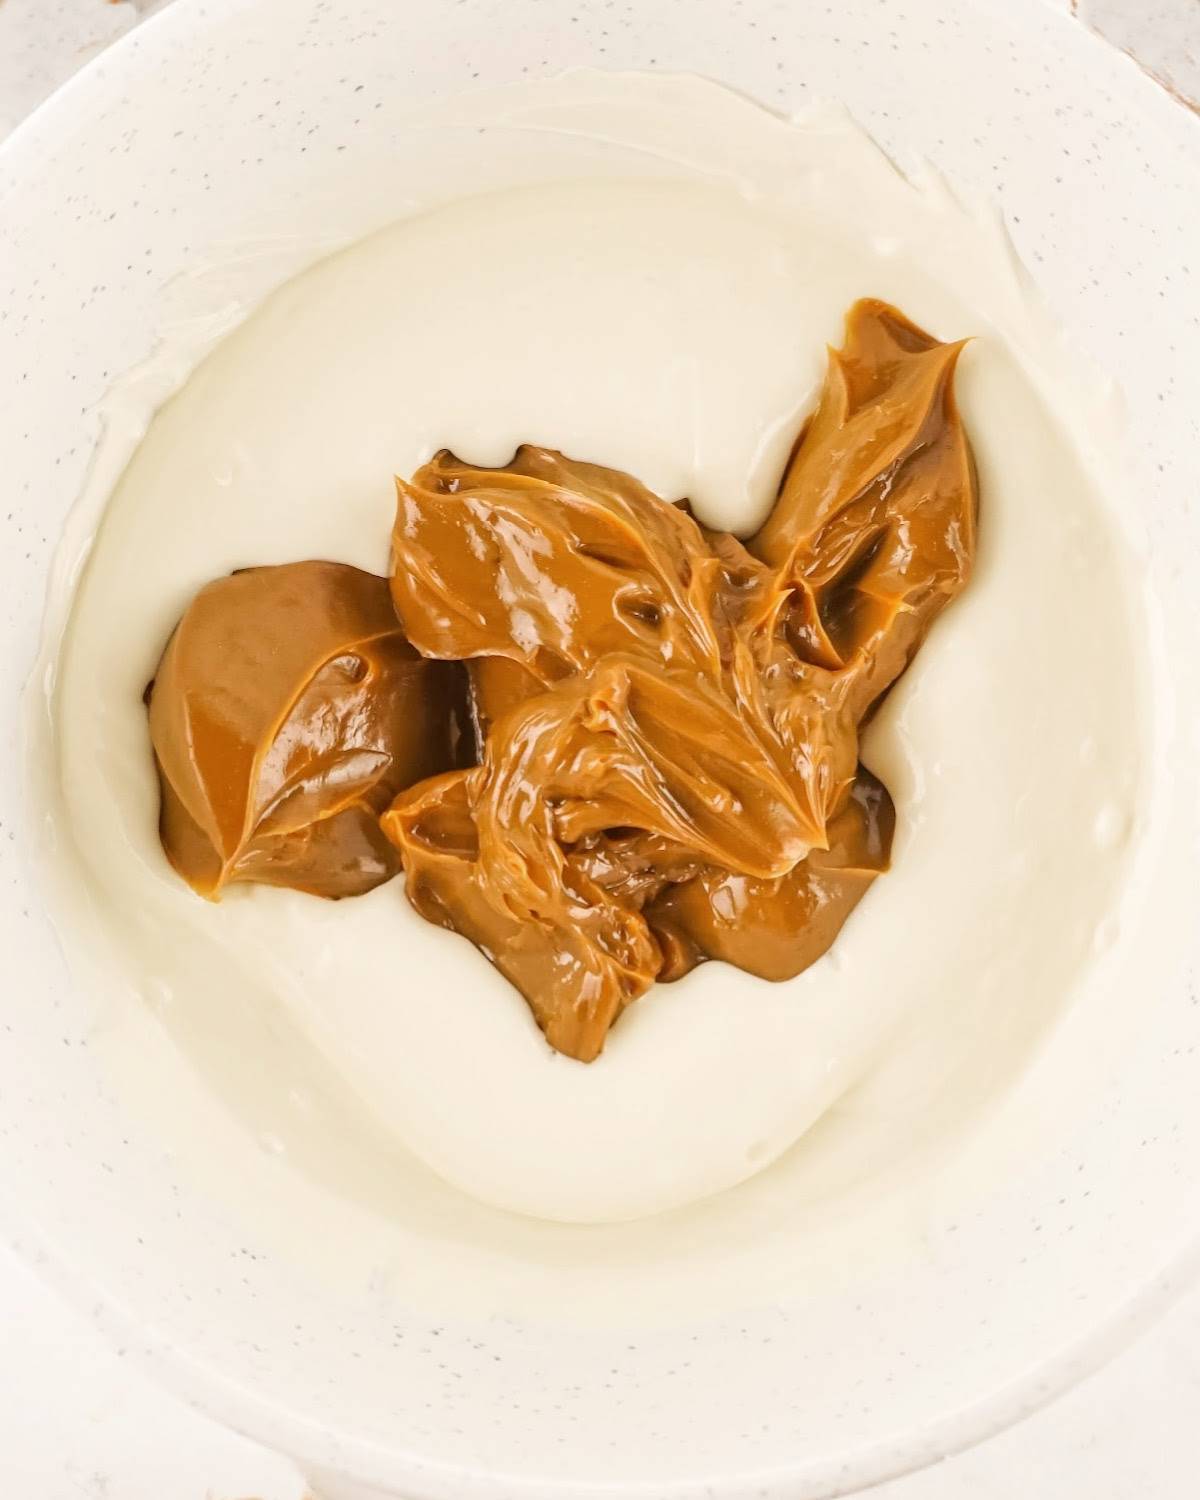 Melted white chocolate and dulce de leche before mixing in a white shallow bowl.